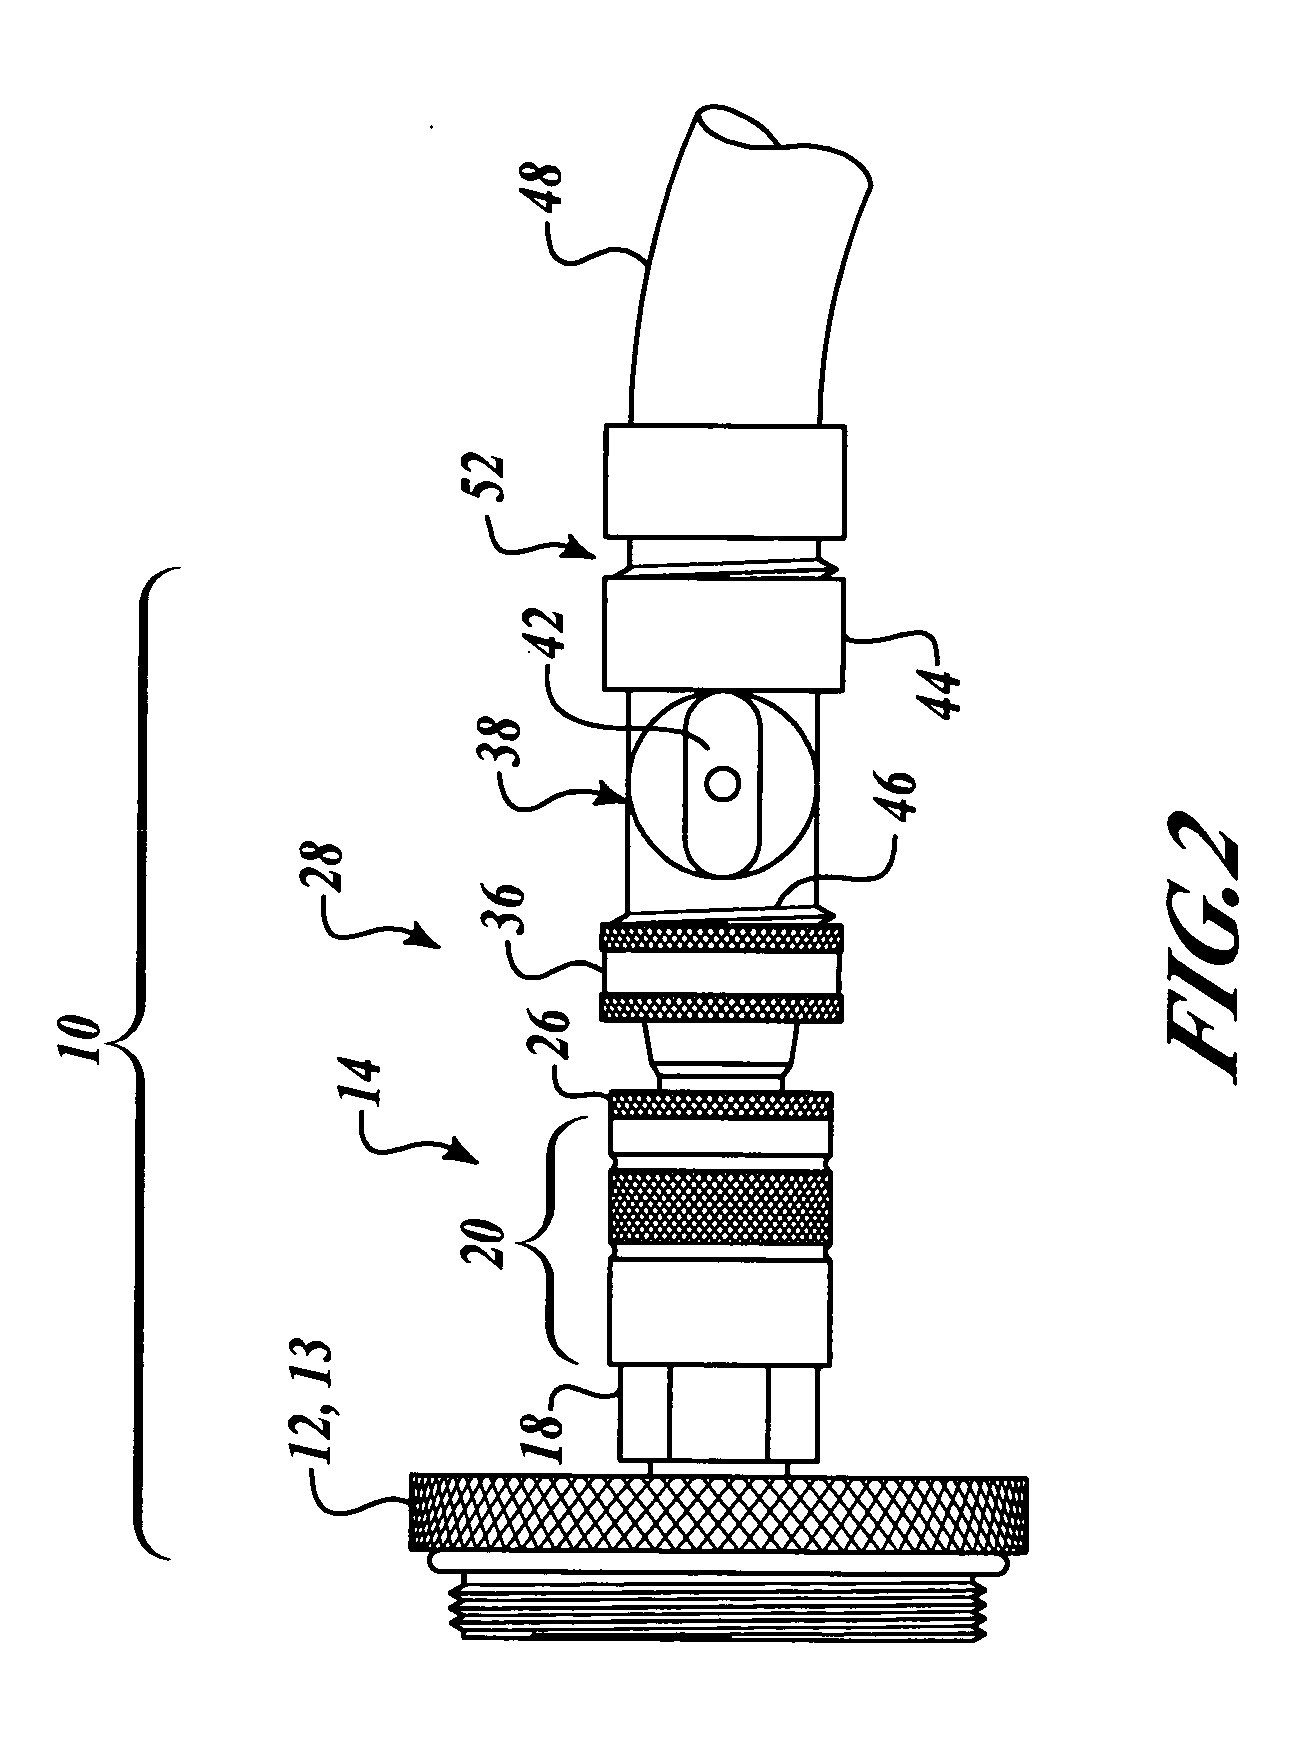 Quick-disconnect, reducer nozzle/valve assembly for filling firefighting backpack tanks